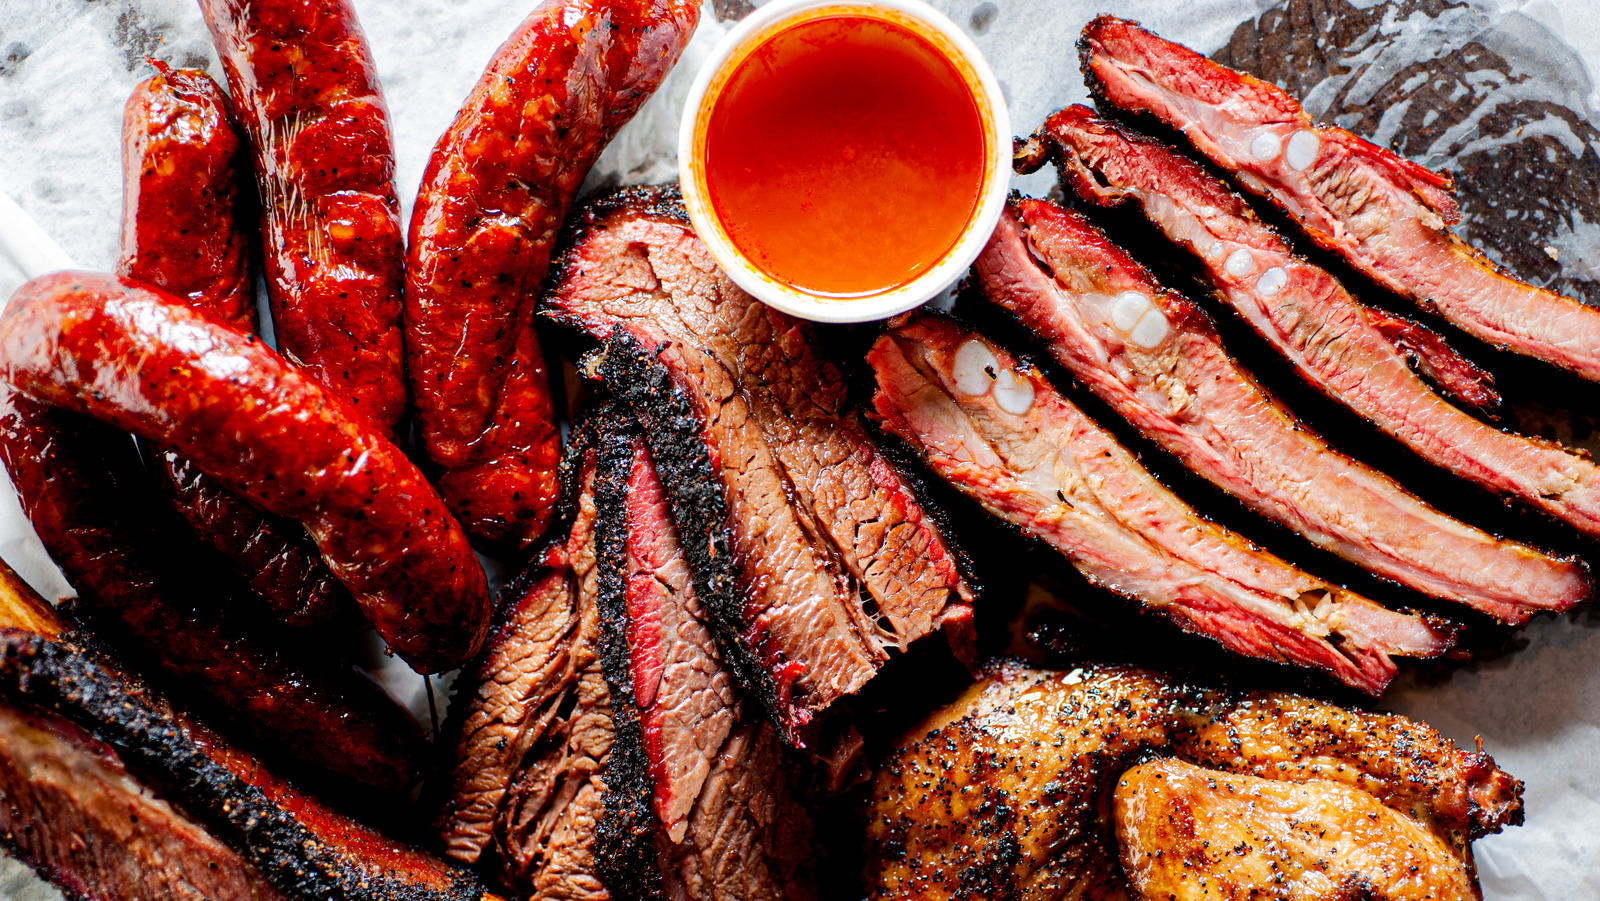 https://www.tastingtable.com/img/gallery/the-4-styles-of-texas-barbecue-explained/l-intro-1673015029.jpg